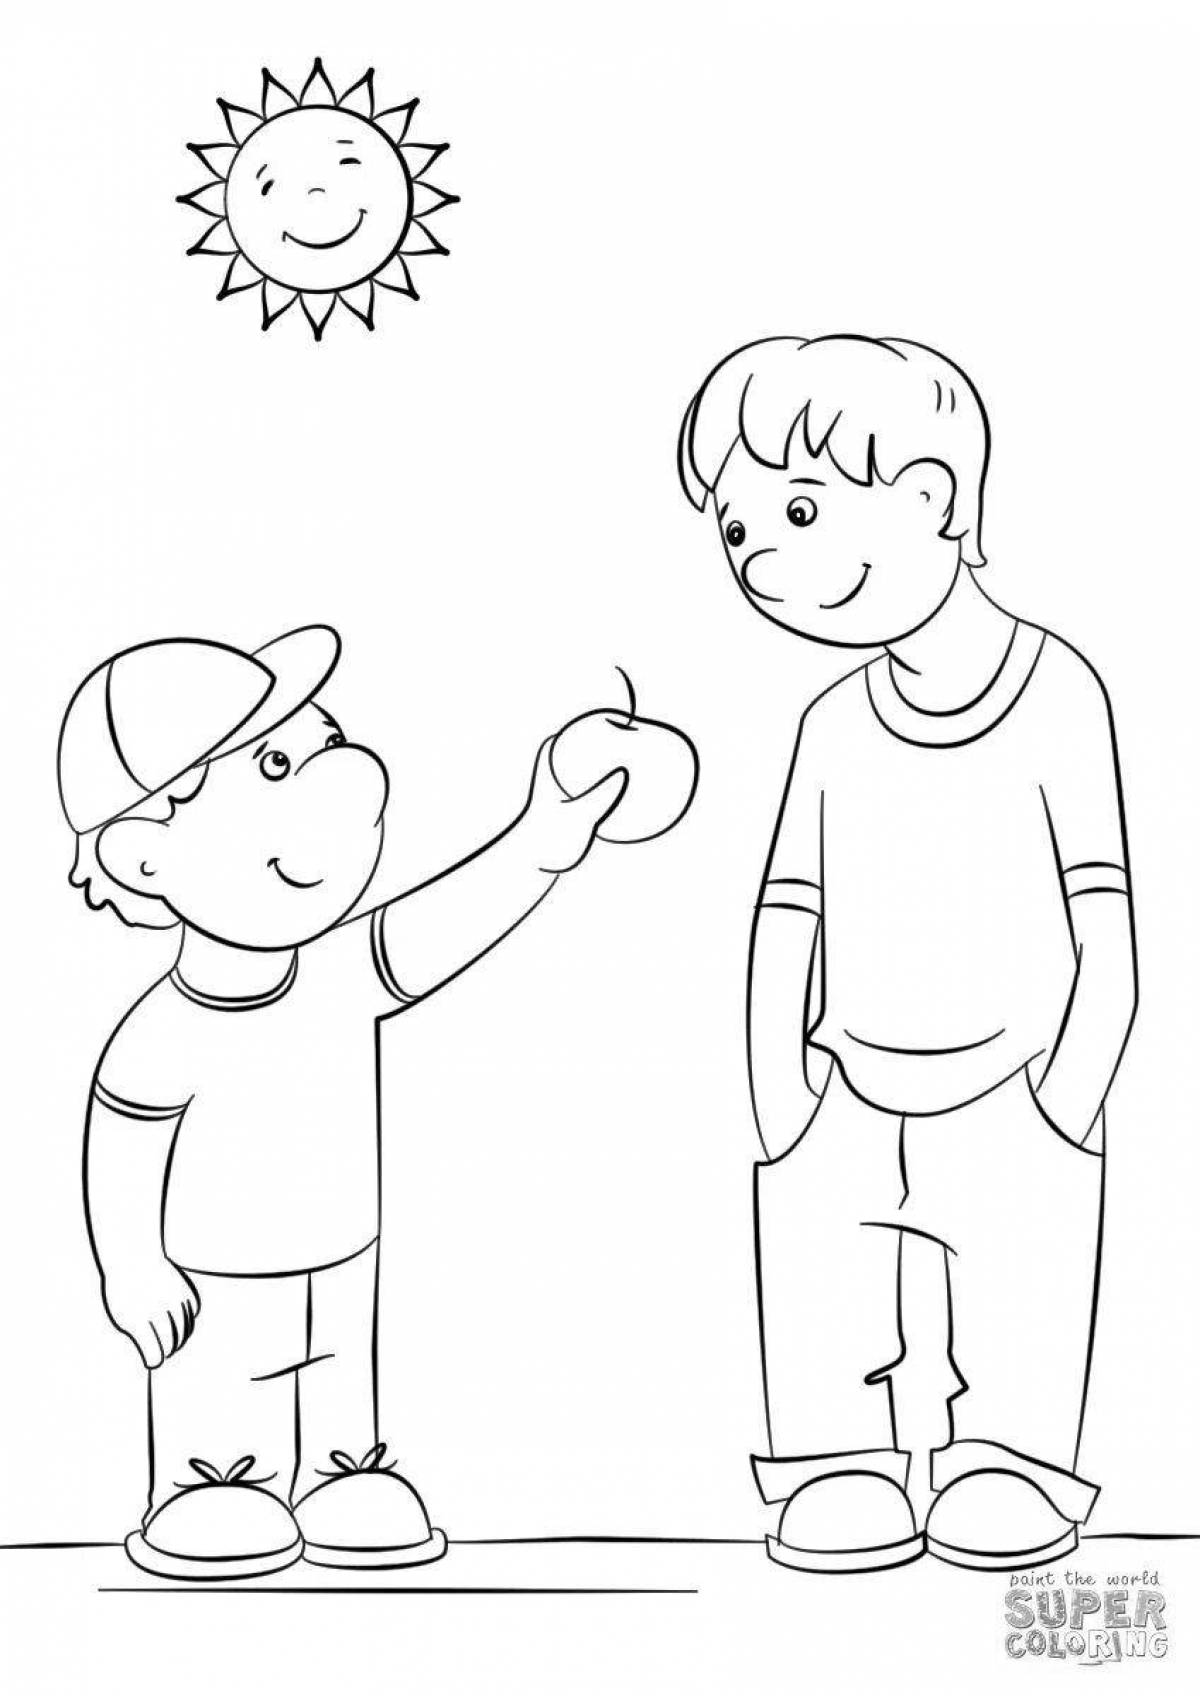 Shining Good Deeds coloring page